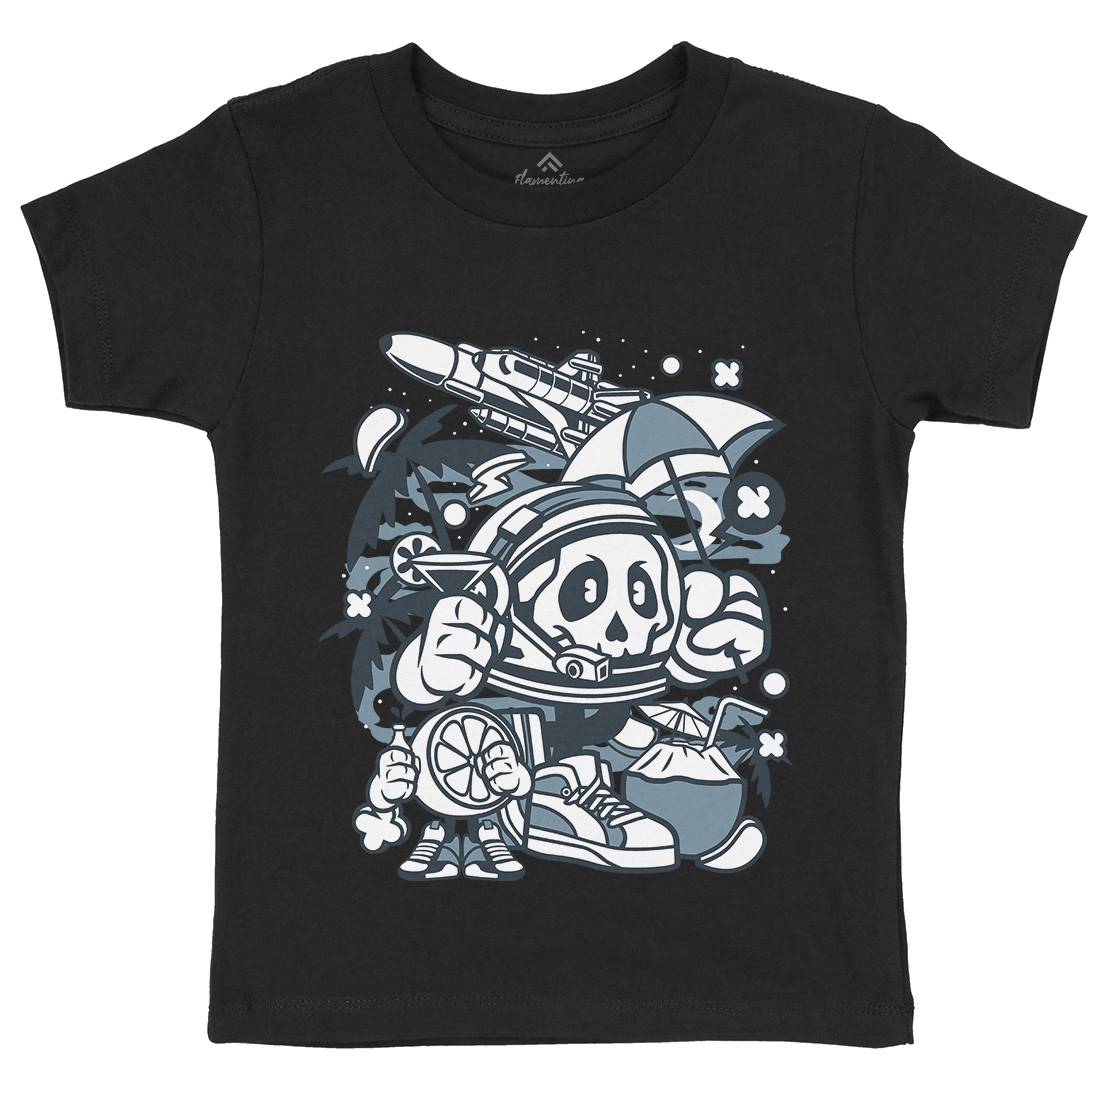 Astronaut Holiday Kids Crew Neck T-Shirt Space C009